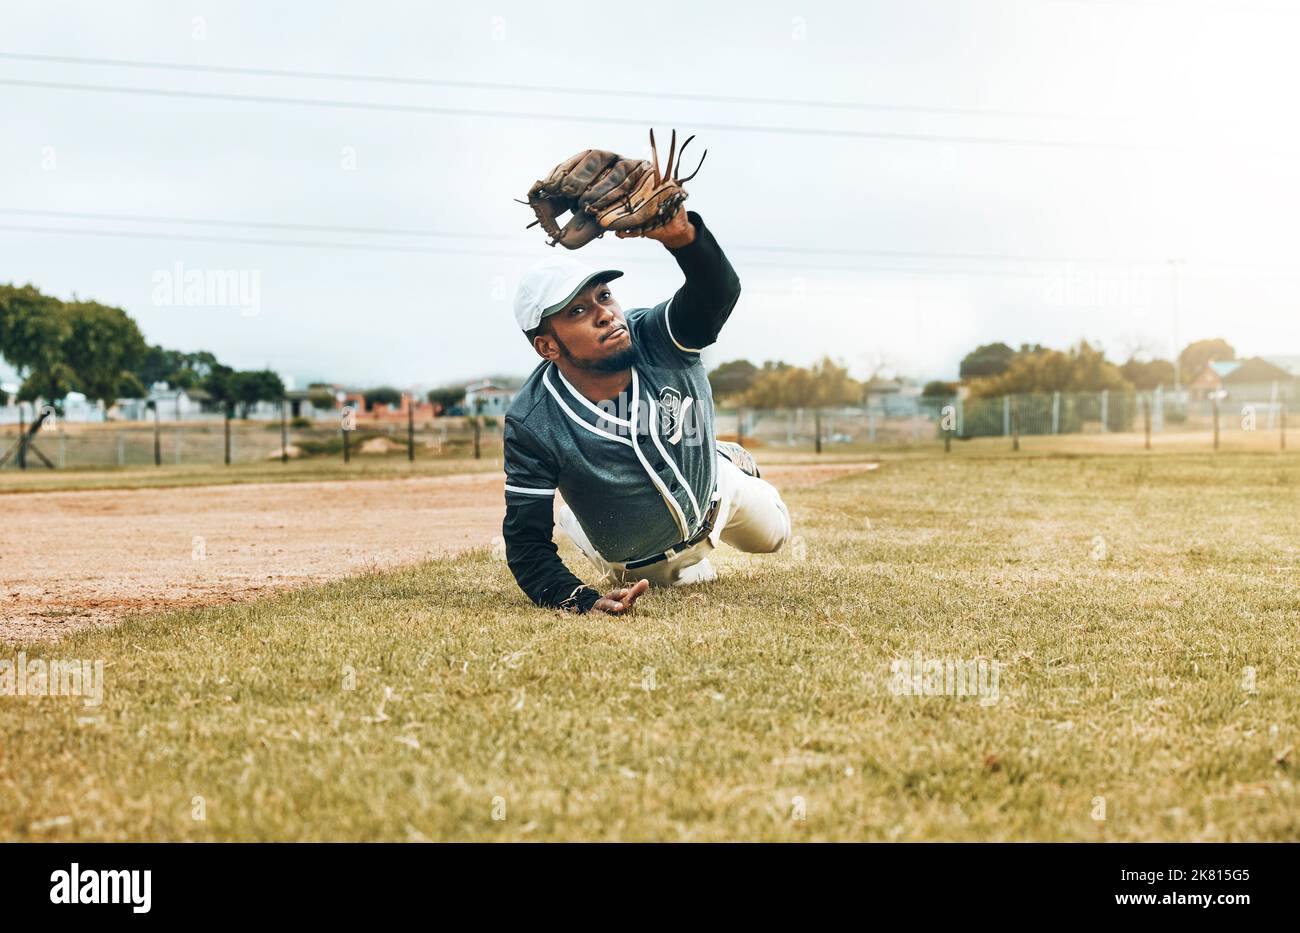 Baseball, sports and catch with a man athlete catching a ball during a game or match on a field for sport. Fitness, exercise and training with a Stock Photo